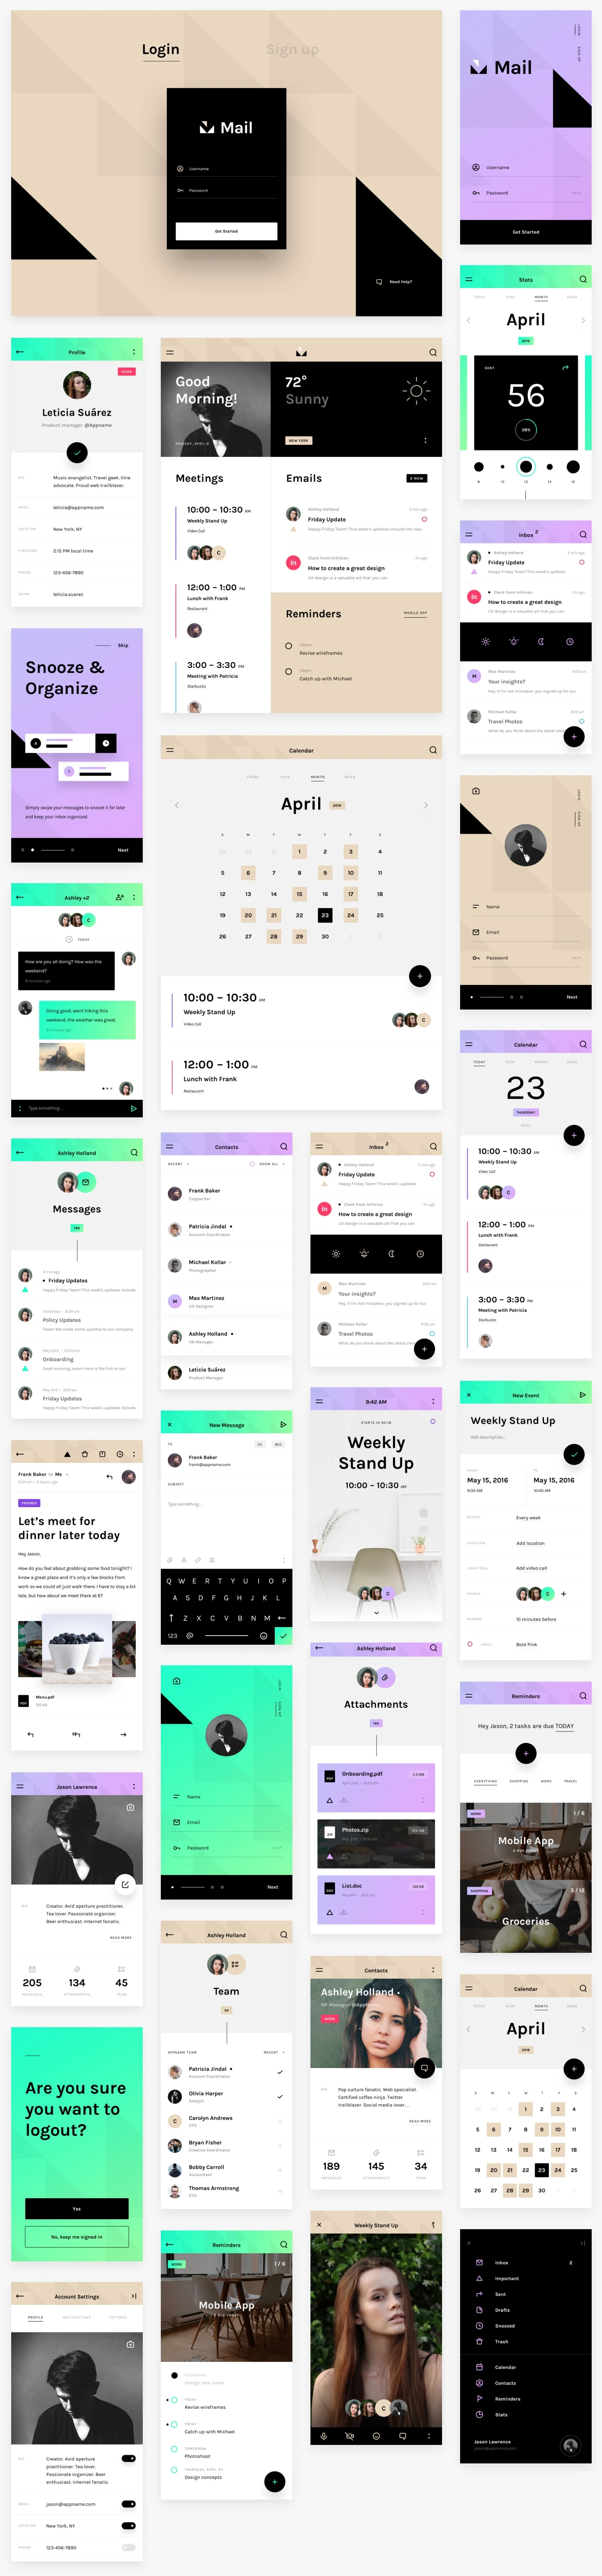 Mail - A free cross-platform UI kit - Tailor-made for desktop, mobile, tablet, and smartwatch formats, so your design looks its best on any device.